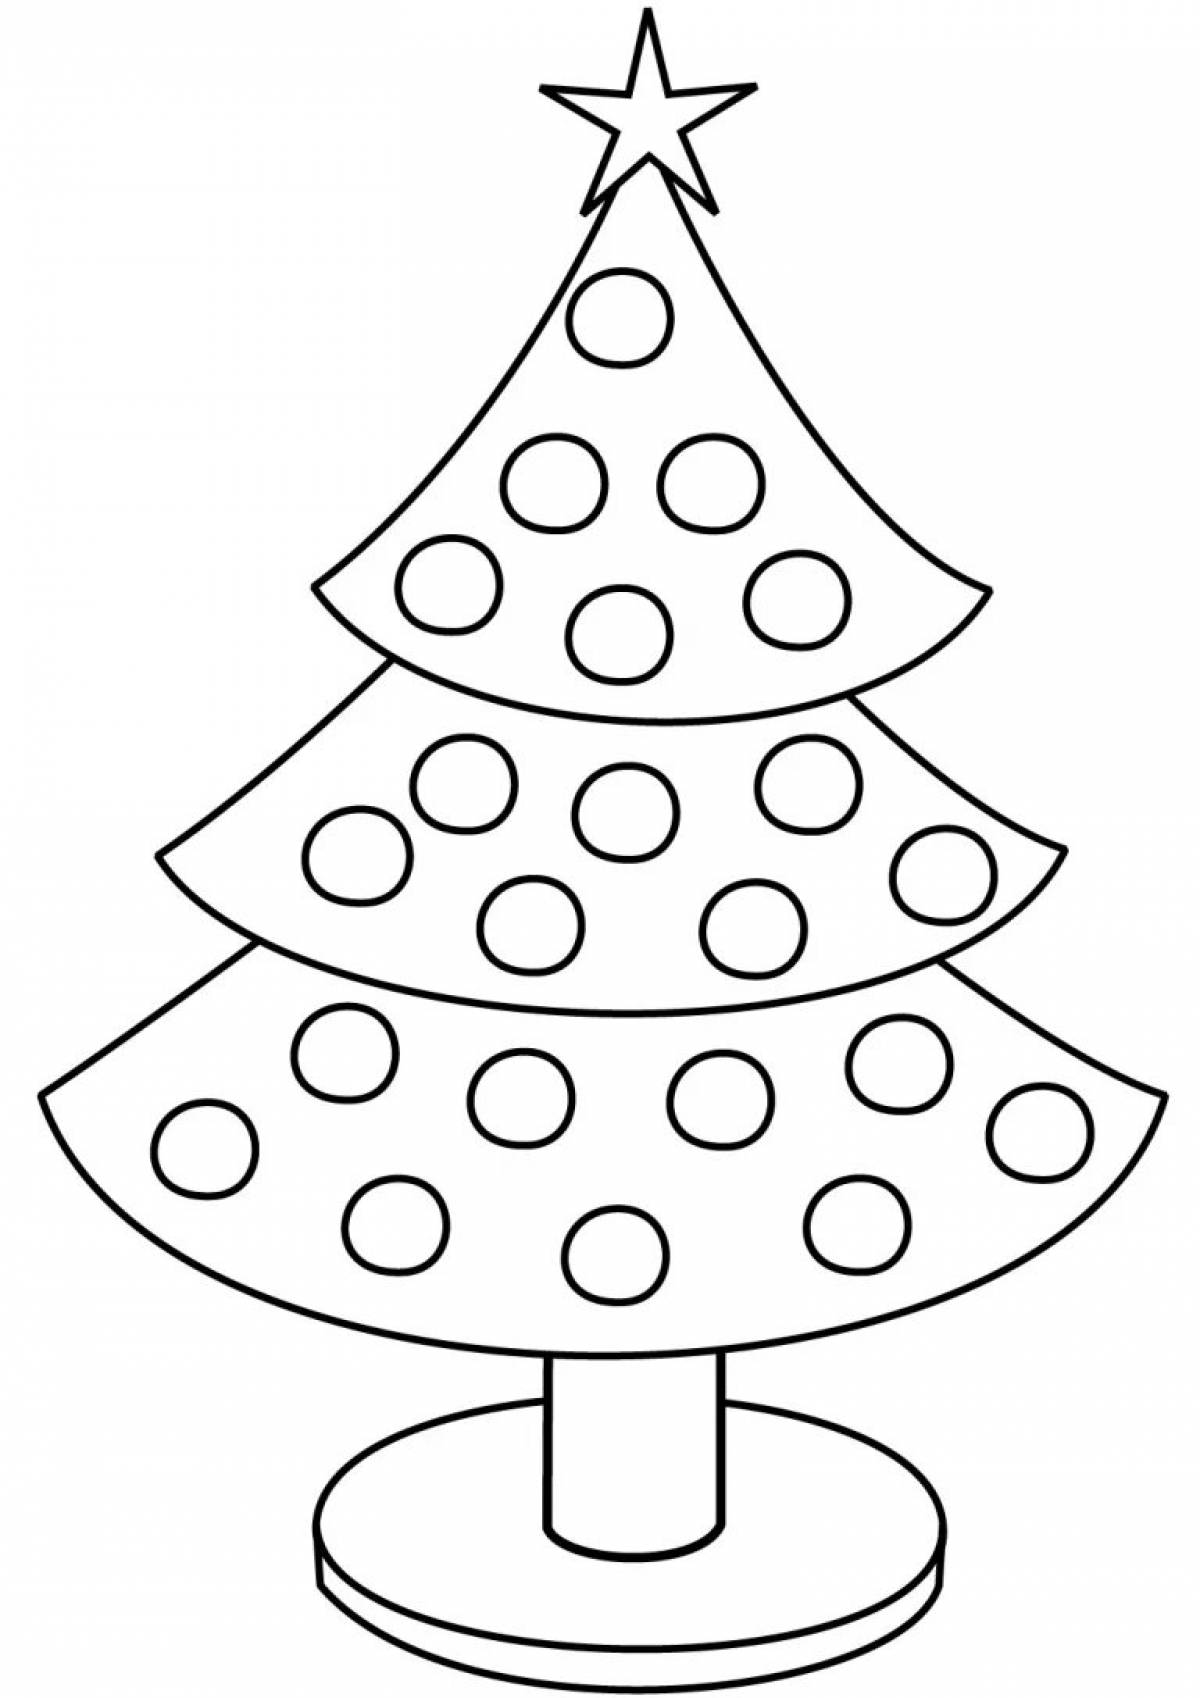 Christmas tree coloring book for preschoolers